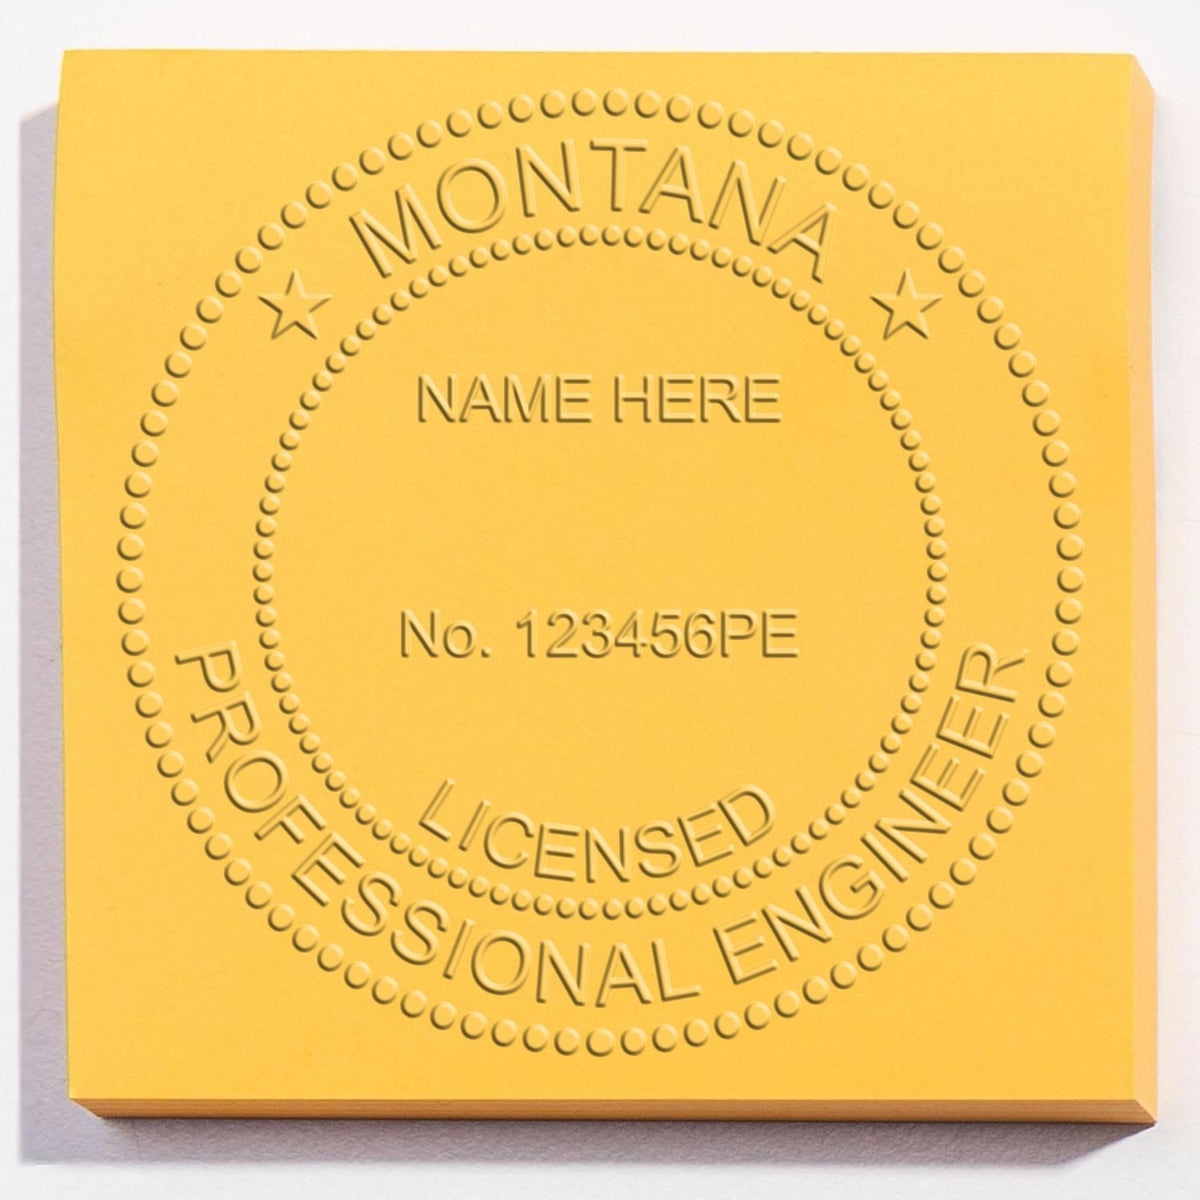 A photograph of the Long Reach Montana PE Seal stamp impression reveals a vivid, professional image of the on paper.